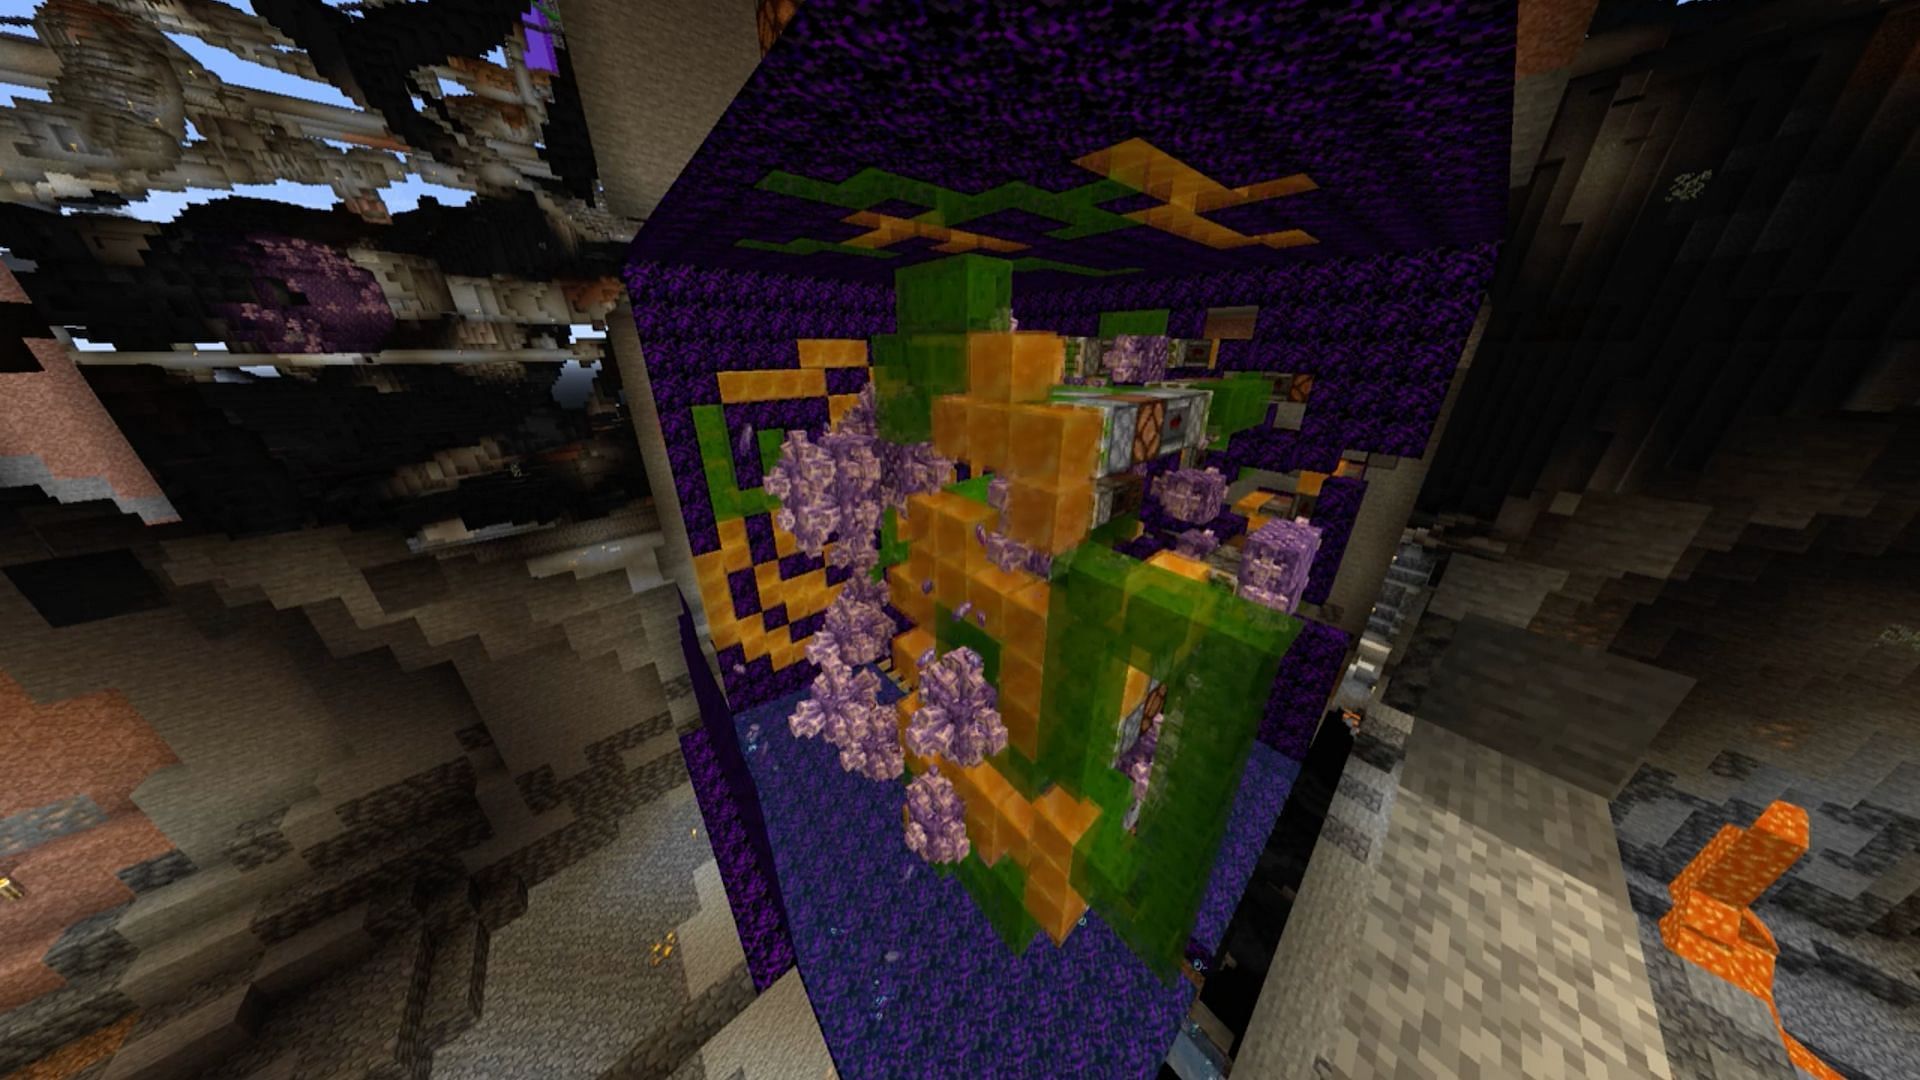 A Minecraft Redditor u/TzarDax posted a video highlighting the amazing precision and skill showcased in the build of this amethyst geode farm created by ilmango (Image via u/TzarDax/Reddit)